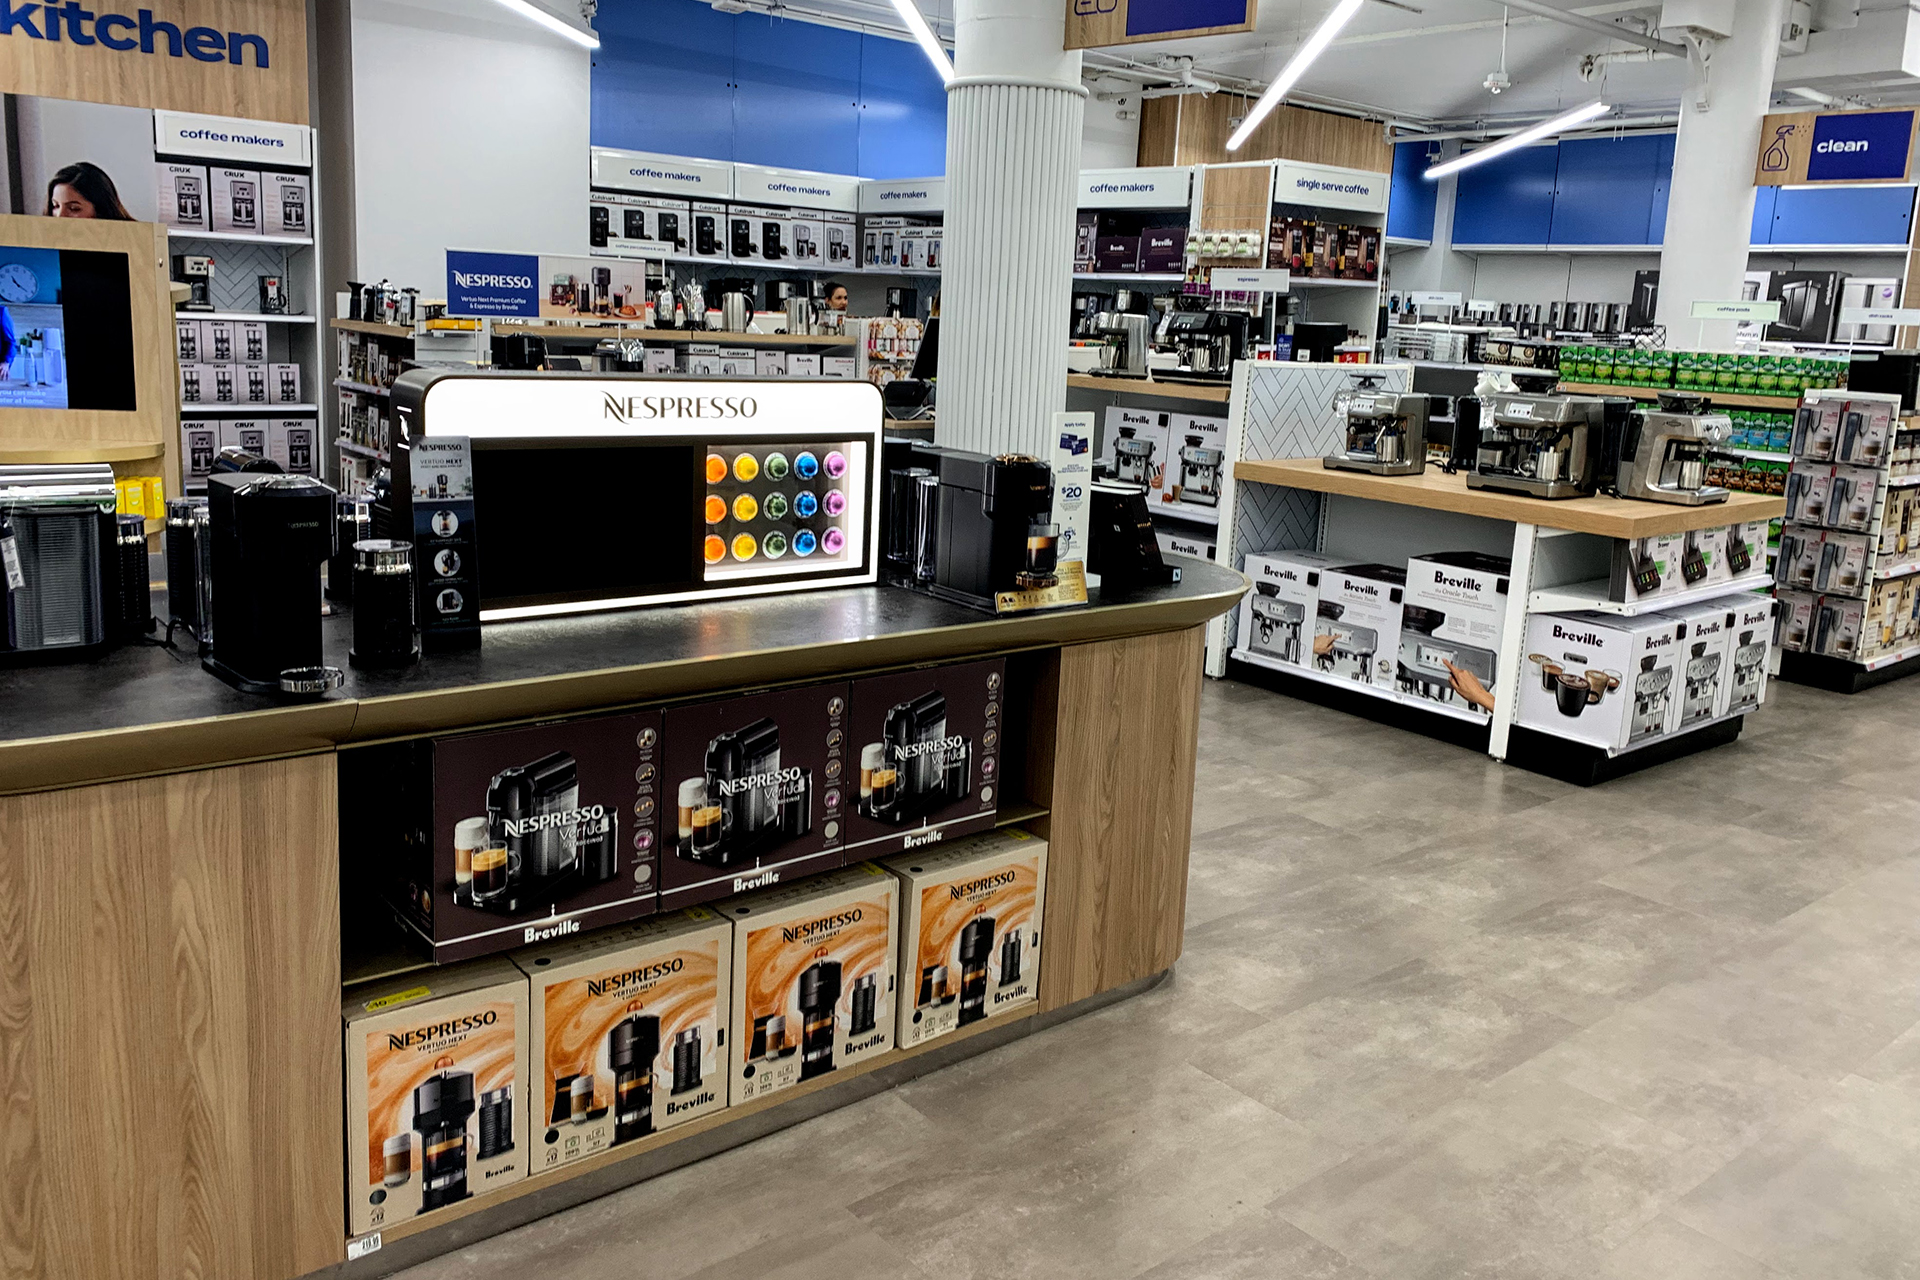 bed bath and beyond kitchen central